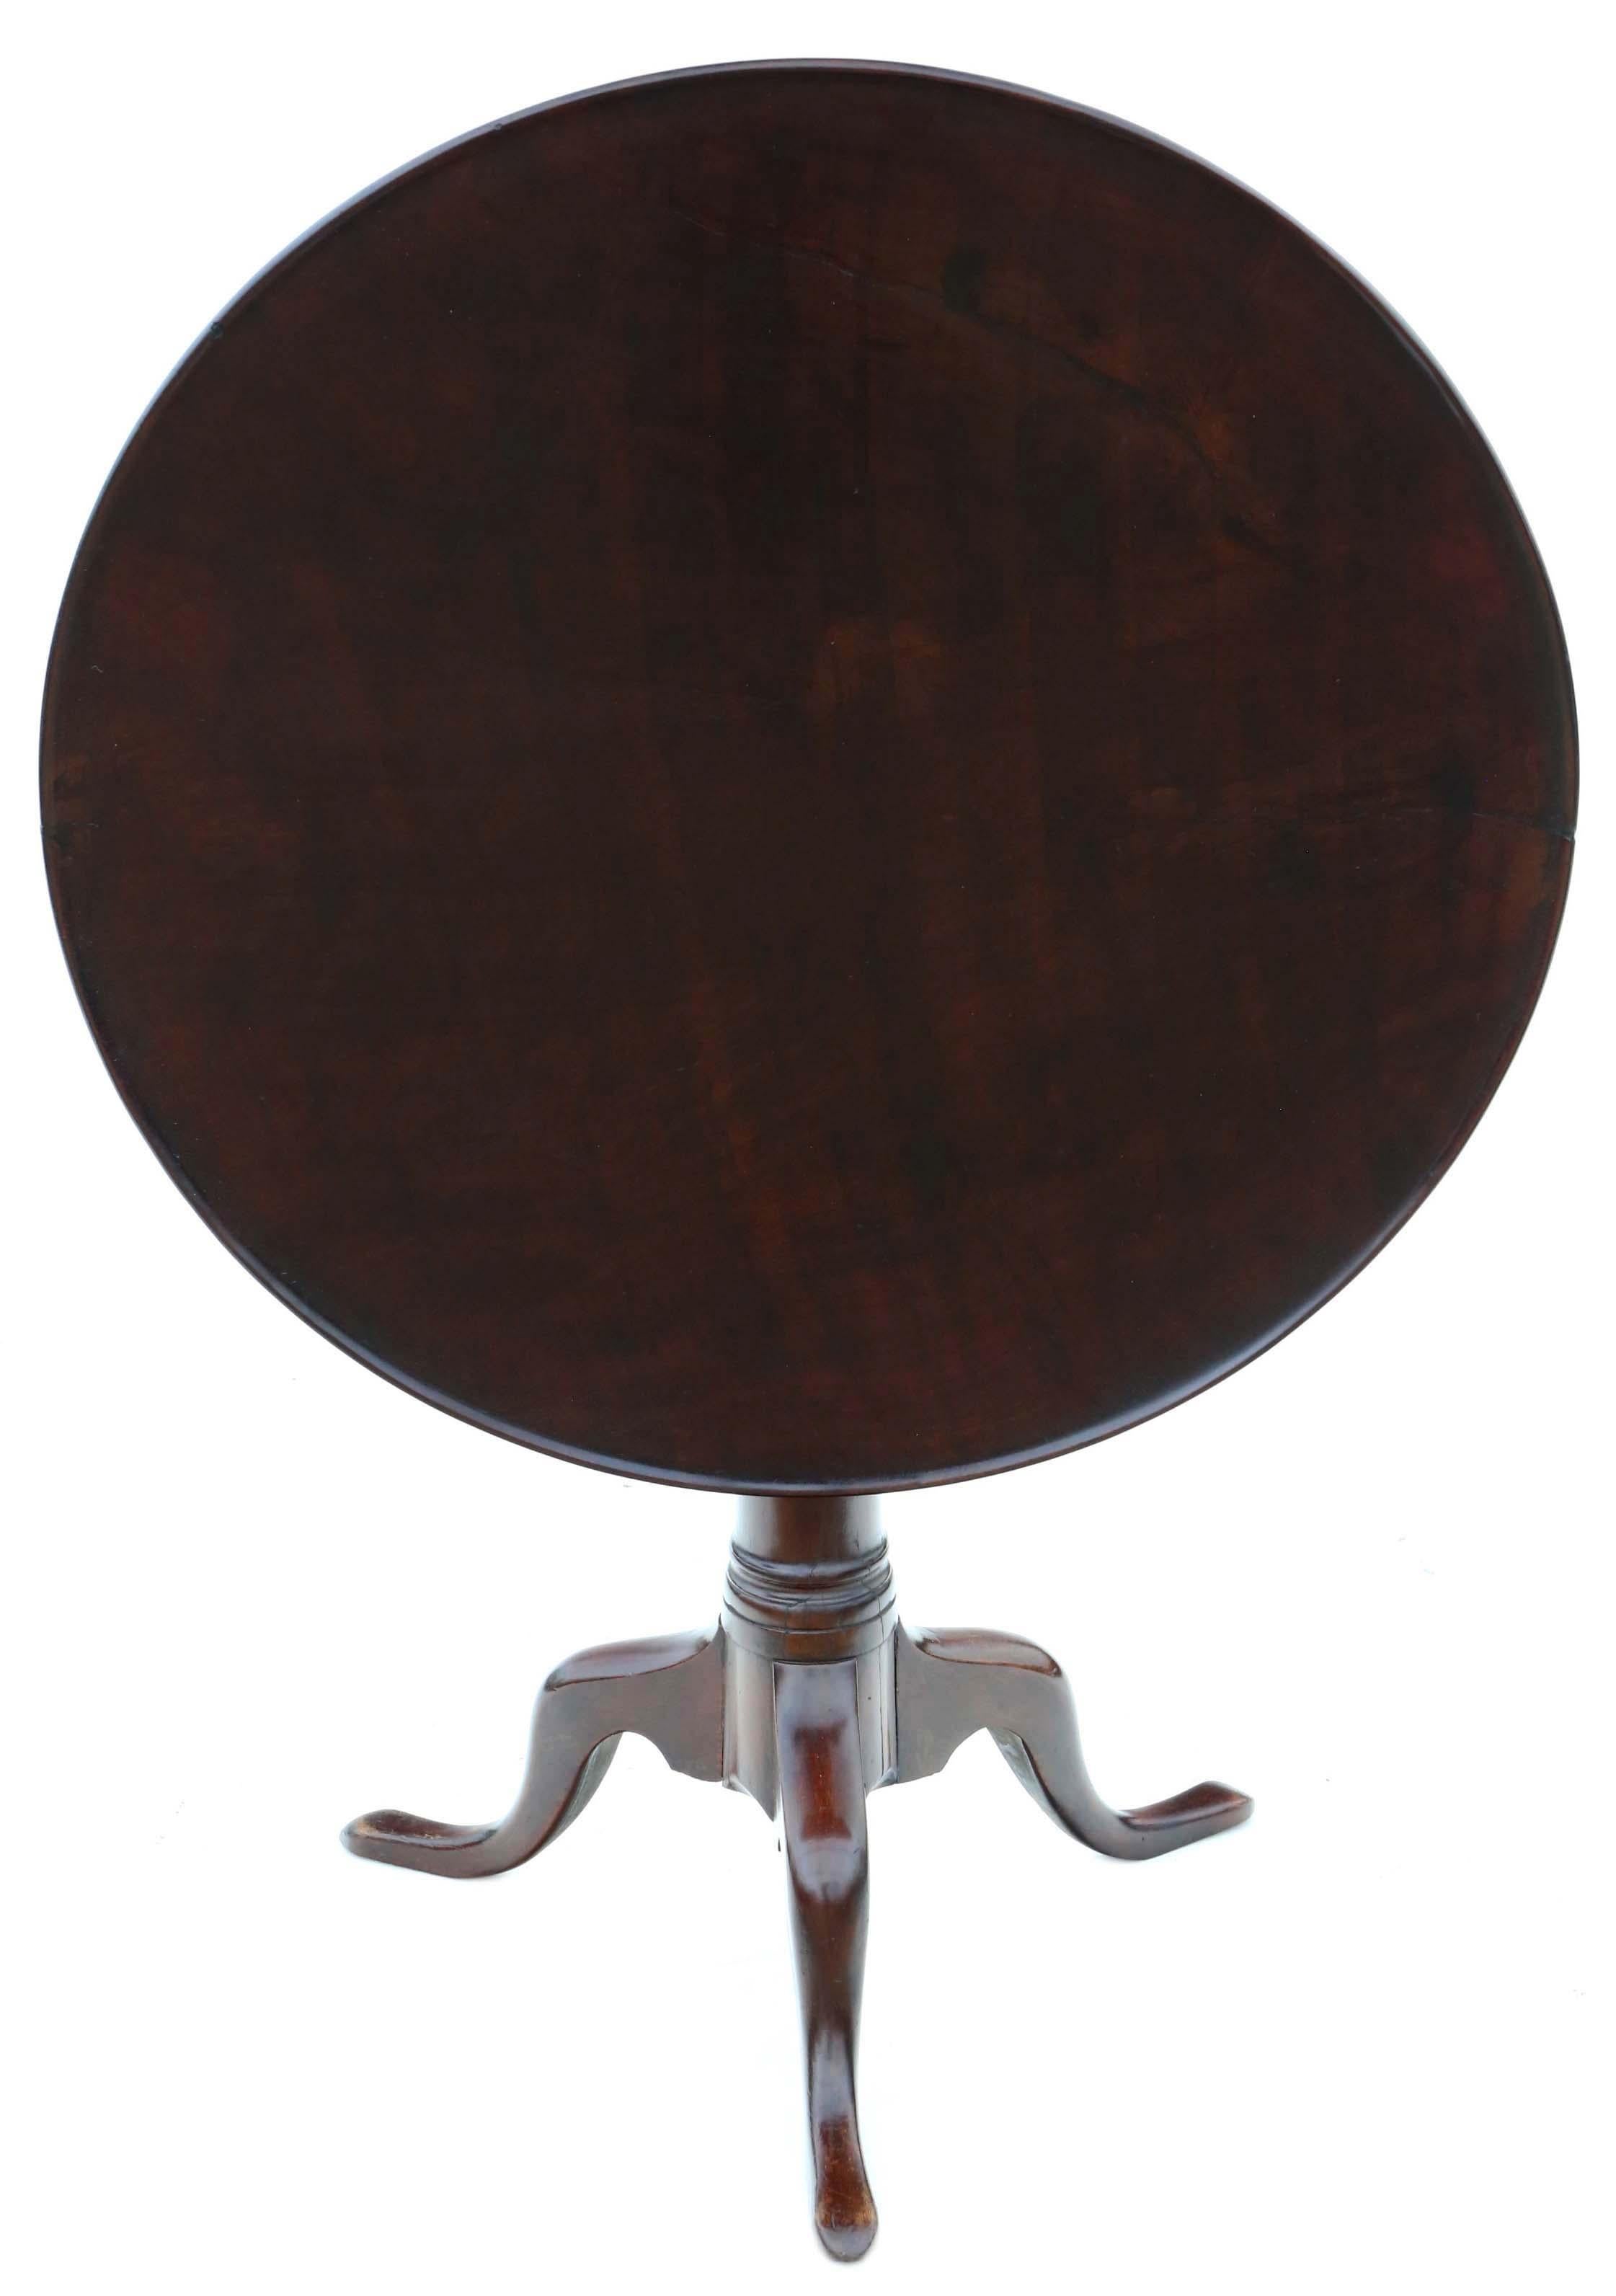 Antique Georgian mahogany tilt-top birdcage supper table from the 18th century. A rare early piece, it is structurally sound with secure joints and a functional catch. The table features a charming gun-barrel stem pedestal and is free from